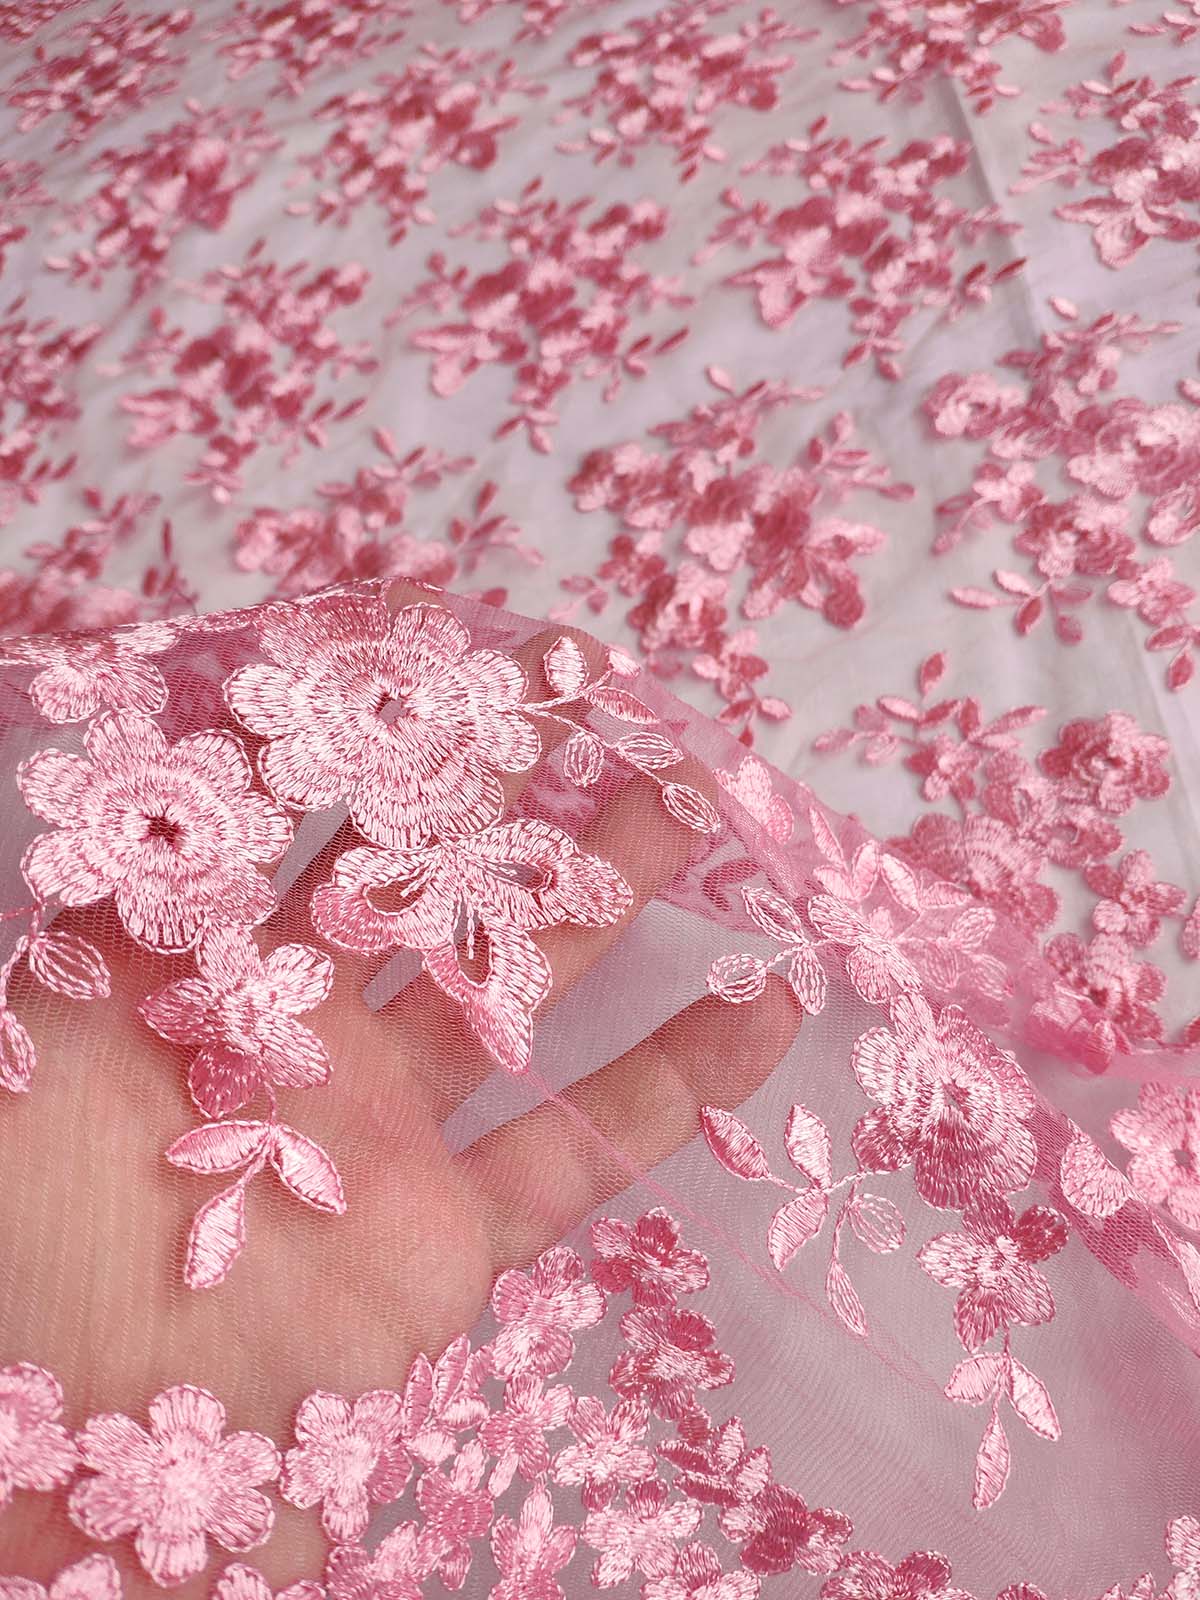 Pink floral embroidered lace fabric #20676 - Design My Fabric